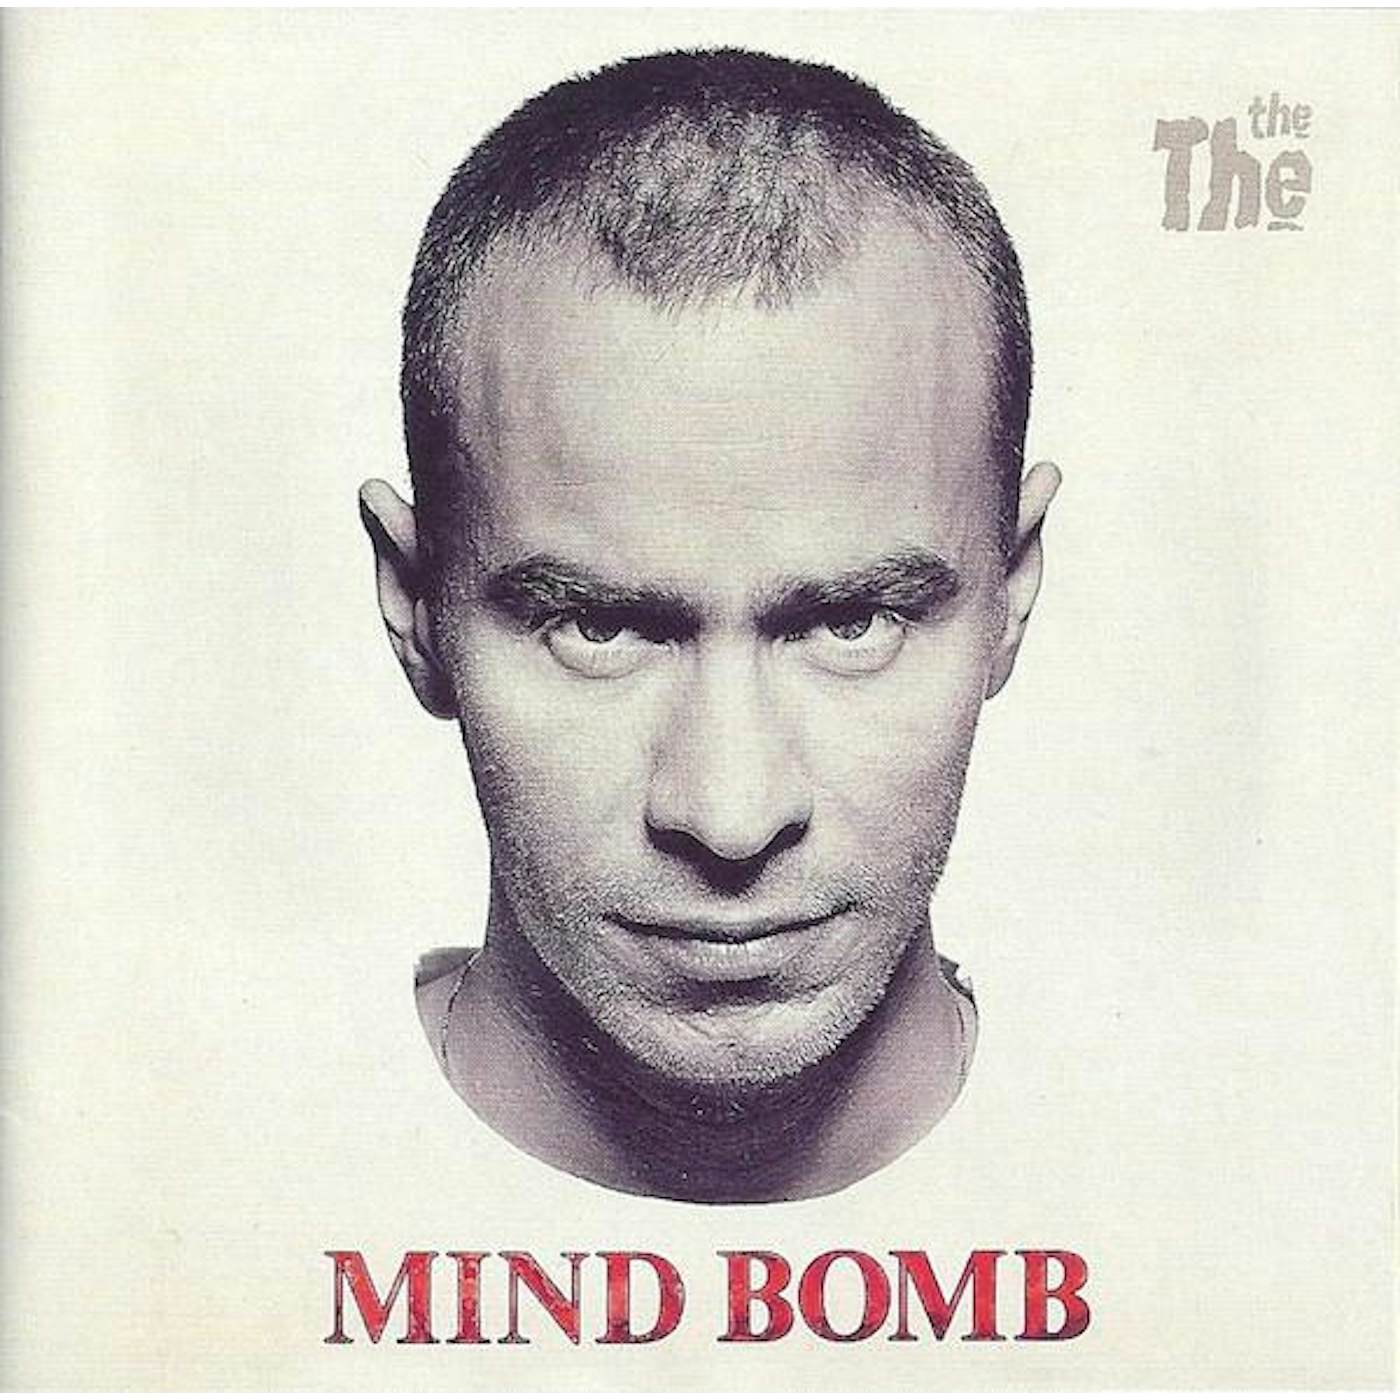 The The MIND BOMB CD